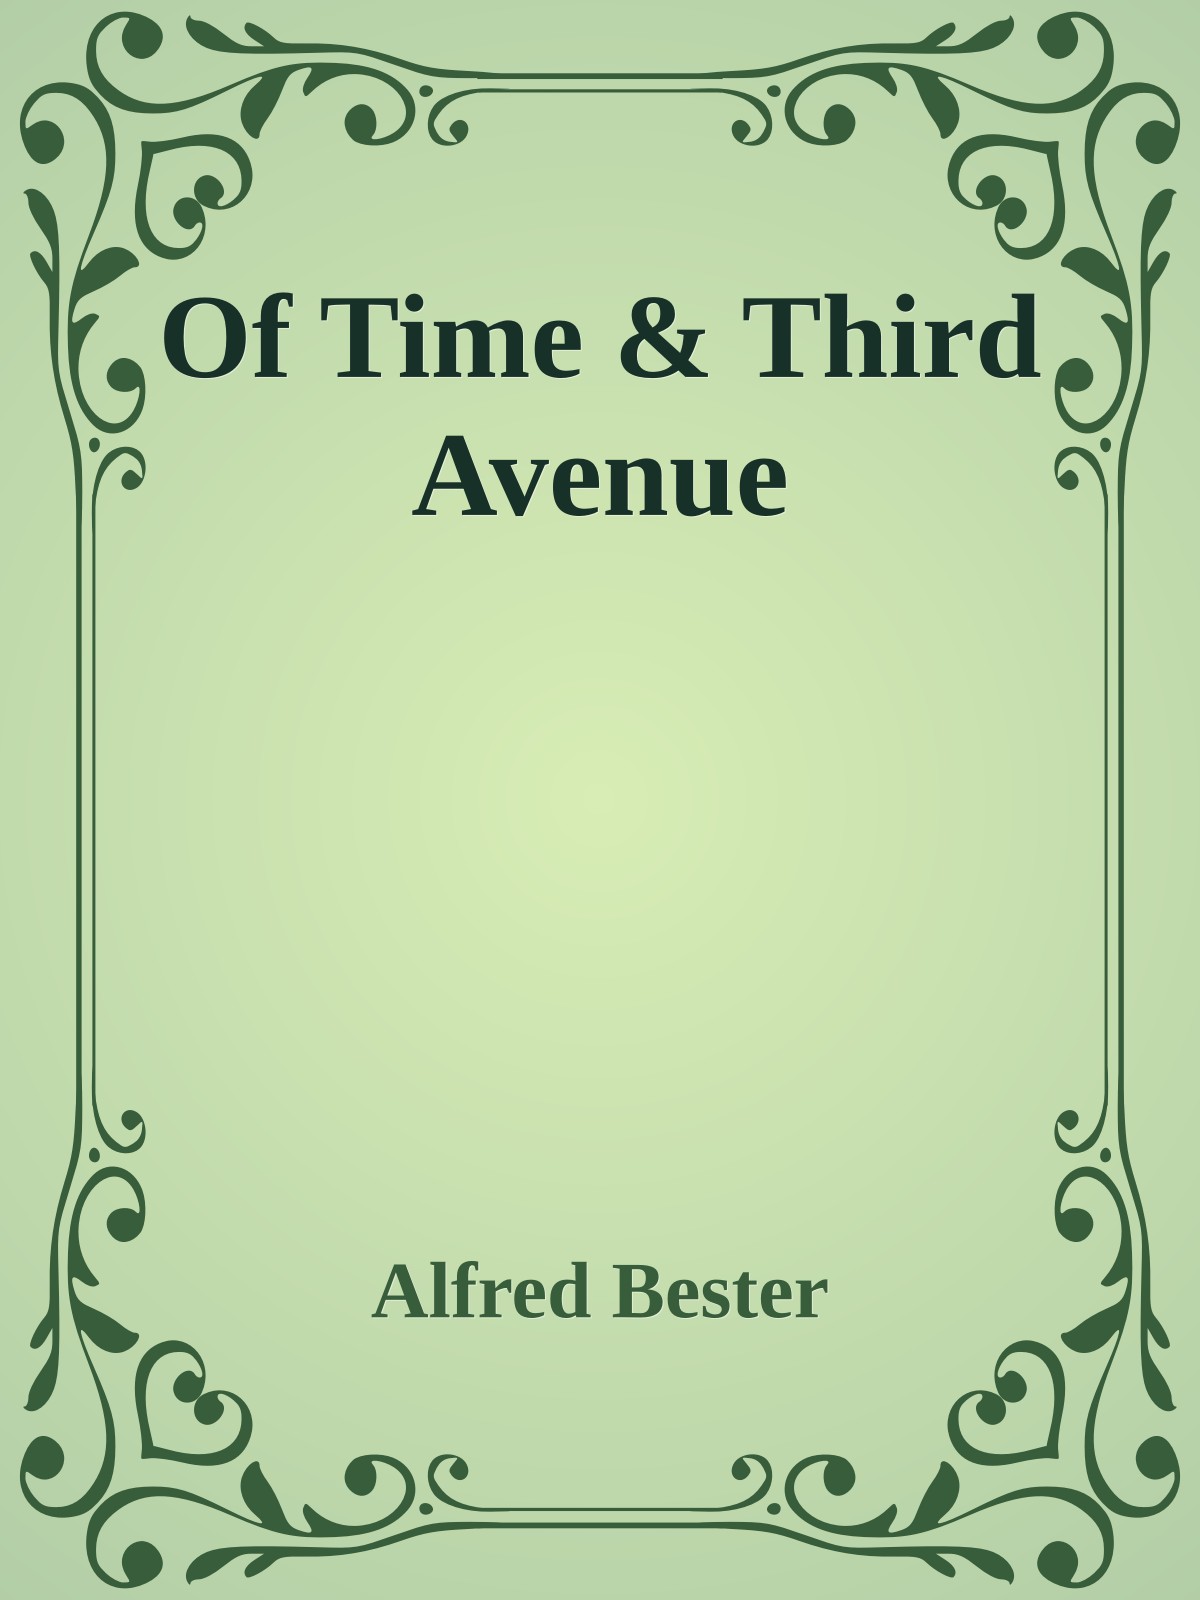 Of Time & Third Avenue